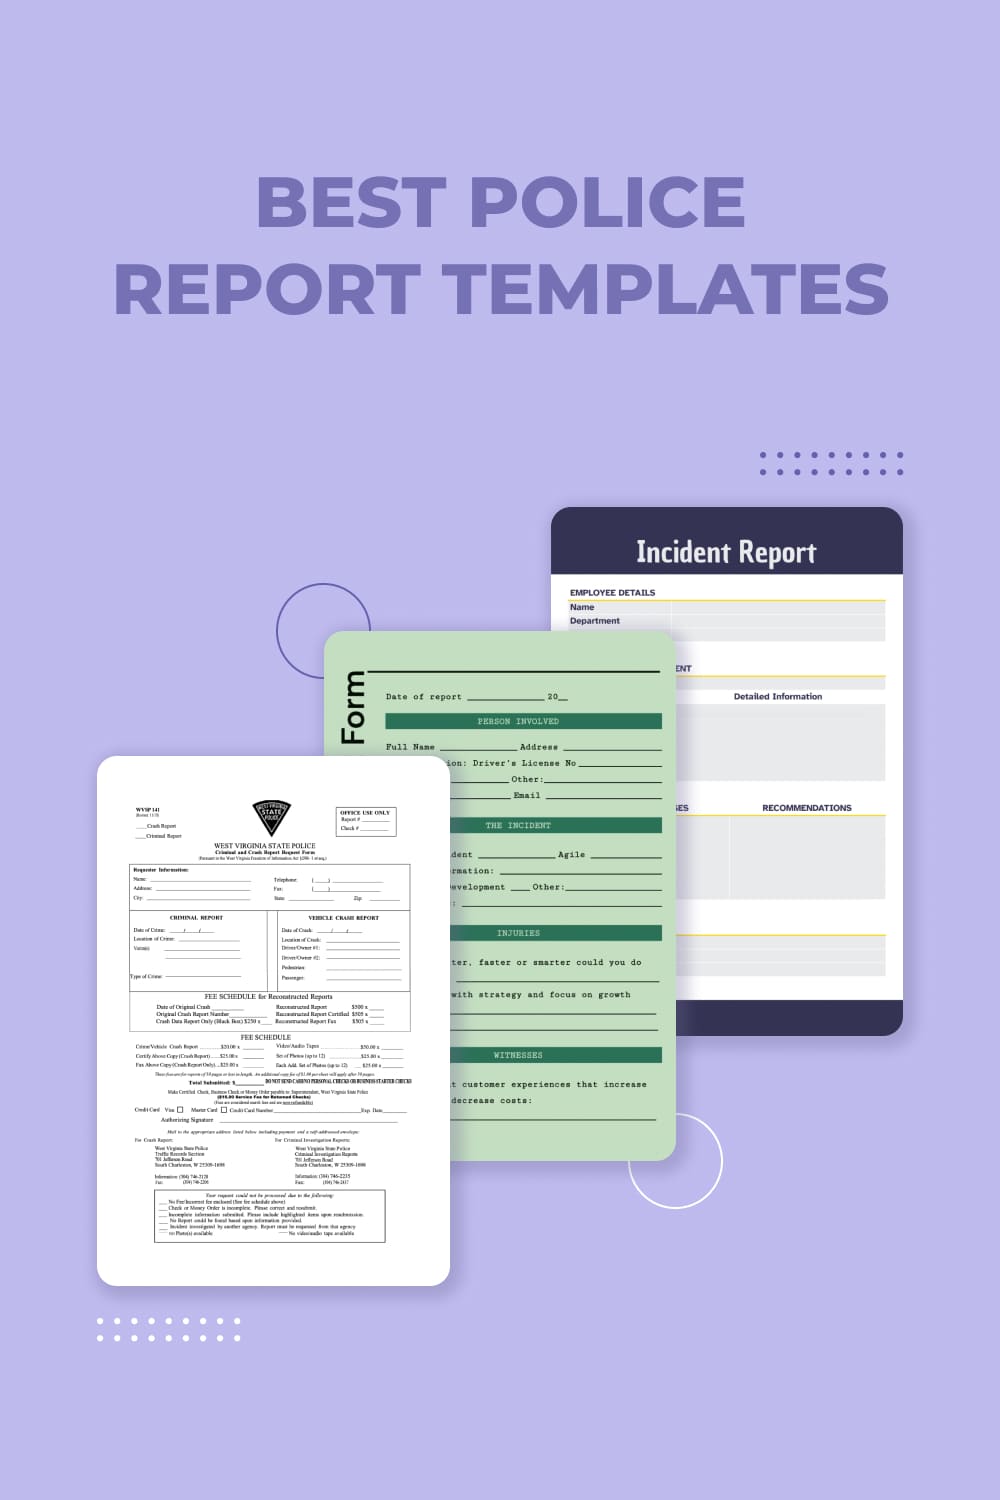 25 best police report templates for 2023 pinterest image 823.